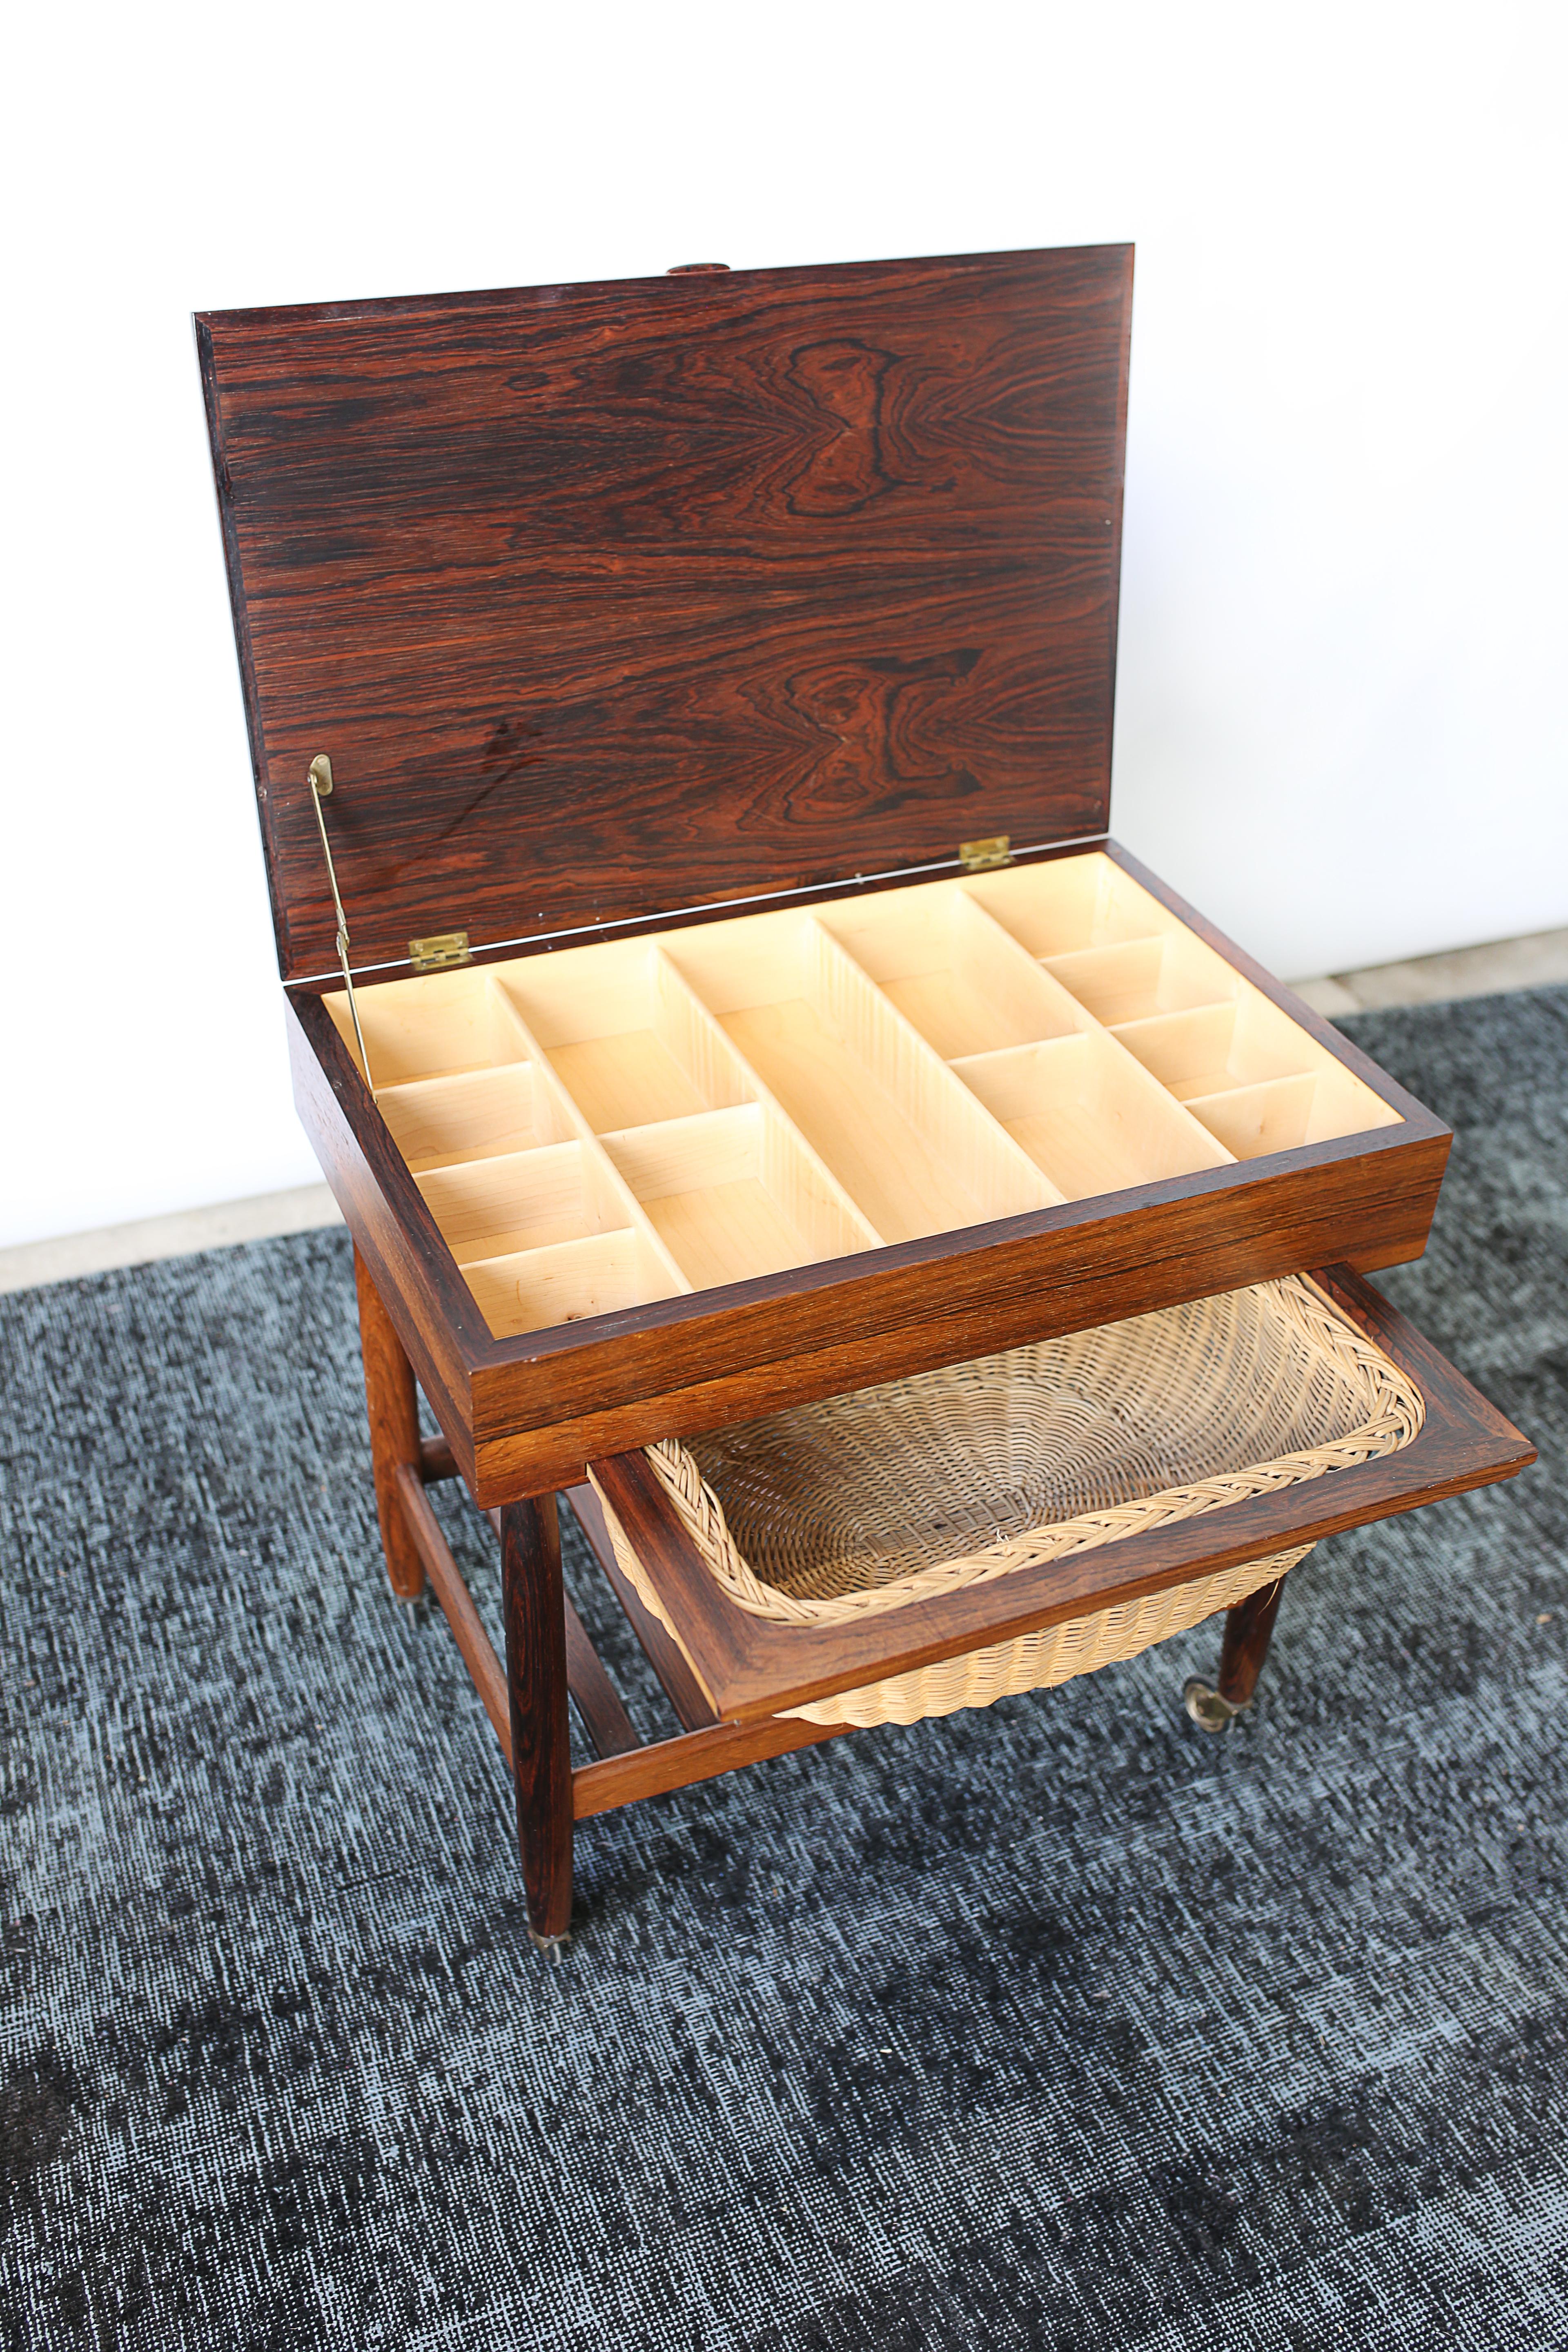 This rosewood sewing table by Ejvind Johannson is in overall good condition. Stylish Danish design. Perfect as a side table. Features include a compartmentalized storage interior, a wicker basket drawer, and a lower shelf with original brass wheel